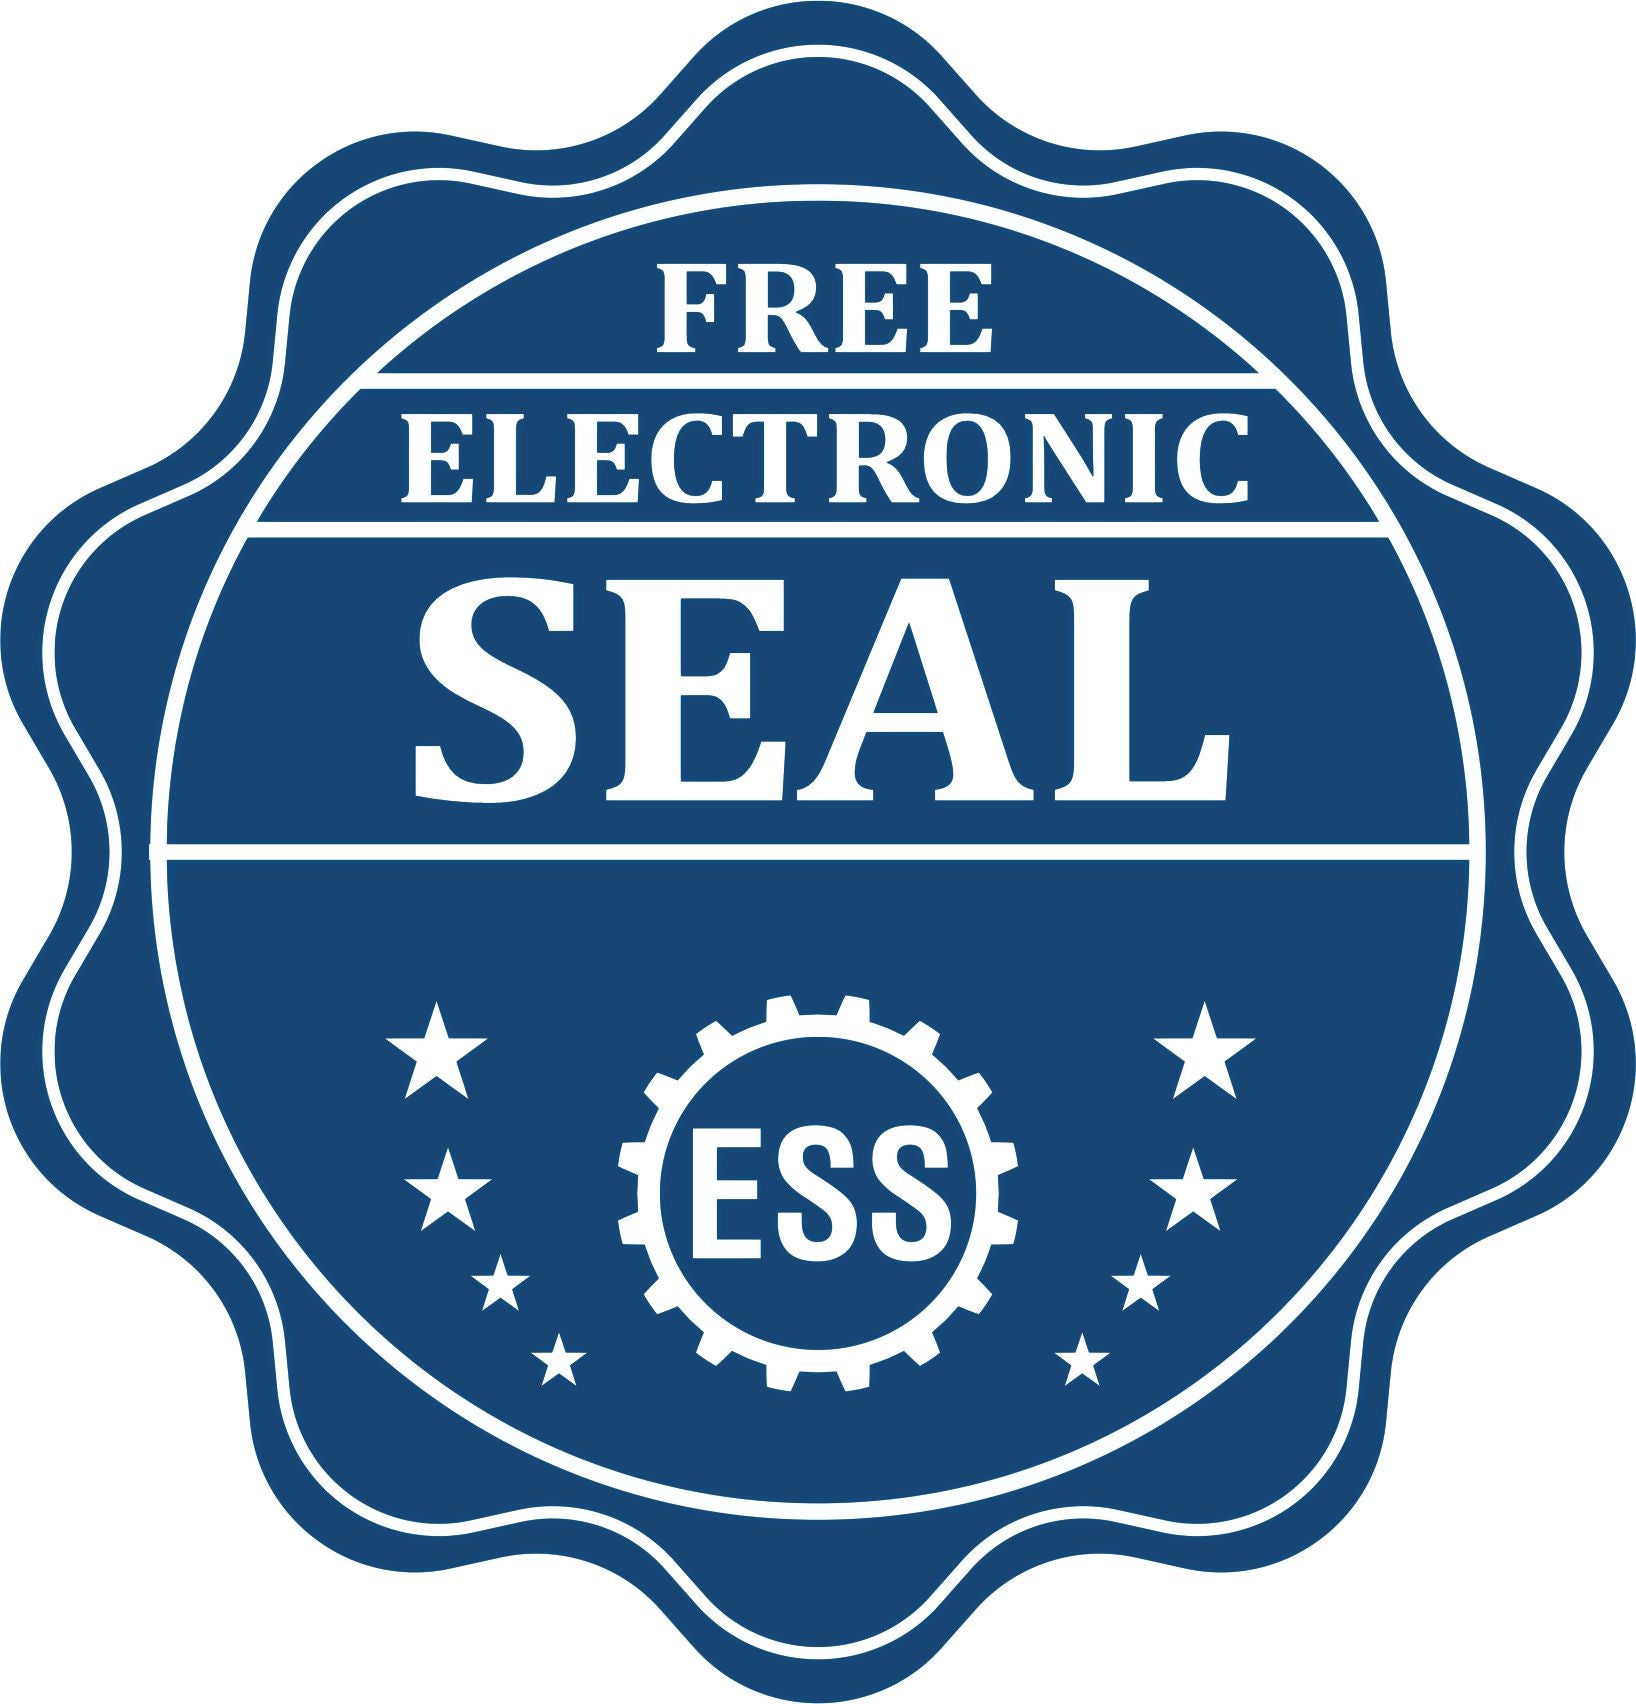 A badge showing a free electronic seal for the Heavy Duty Cast Iron Oklahoma Engineer Seal Embosser with stars and the ESS gear on the emblem.